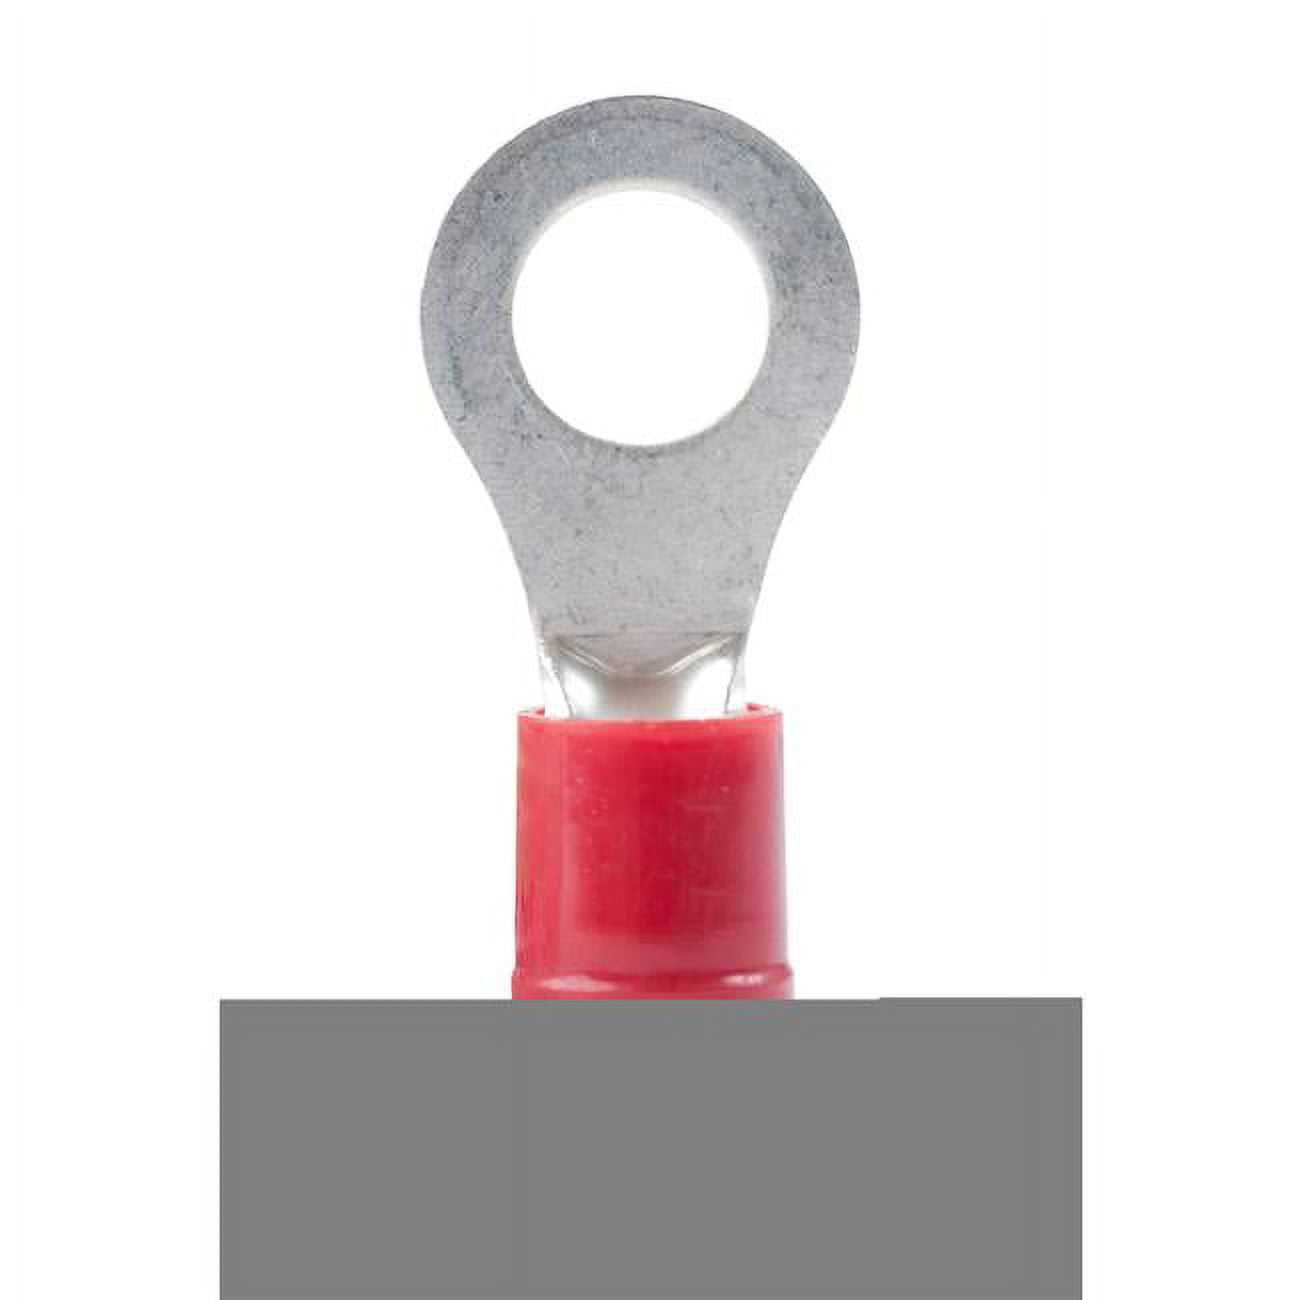 Picture of Gardner Bender 3001494 22-18 Gauge Insulated Ring Terminal, Red - Pack of 10